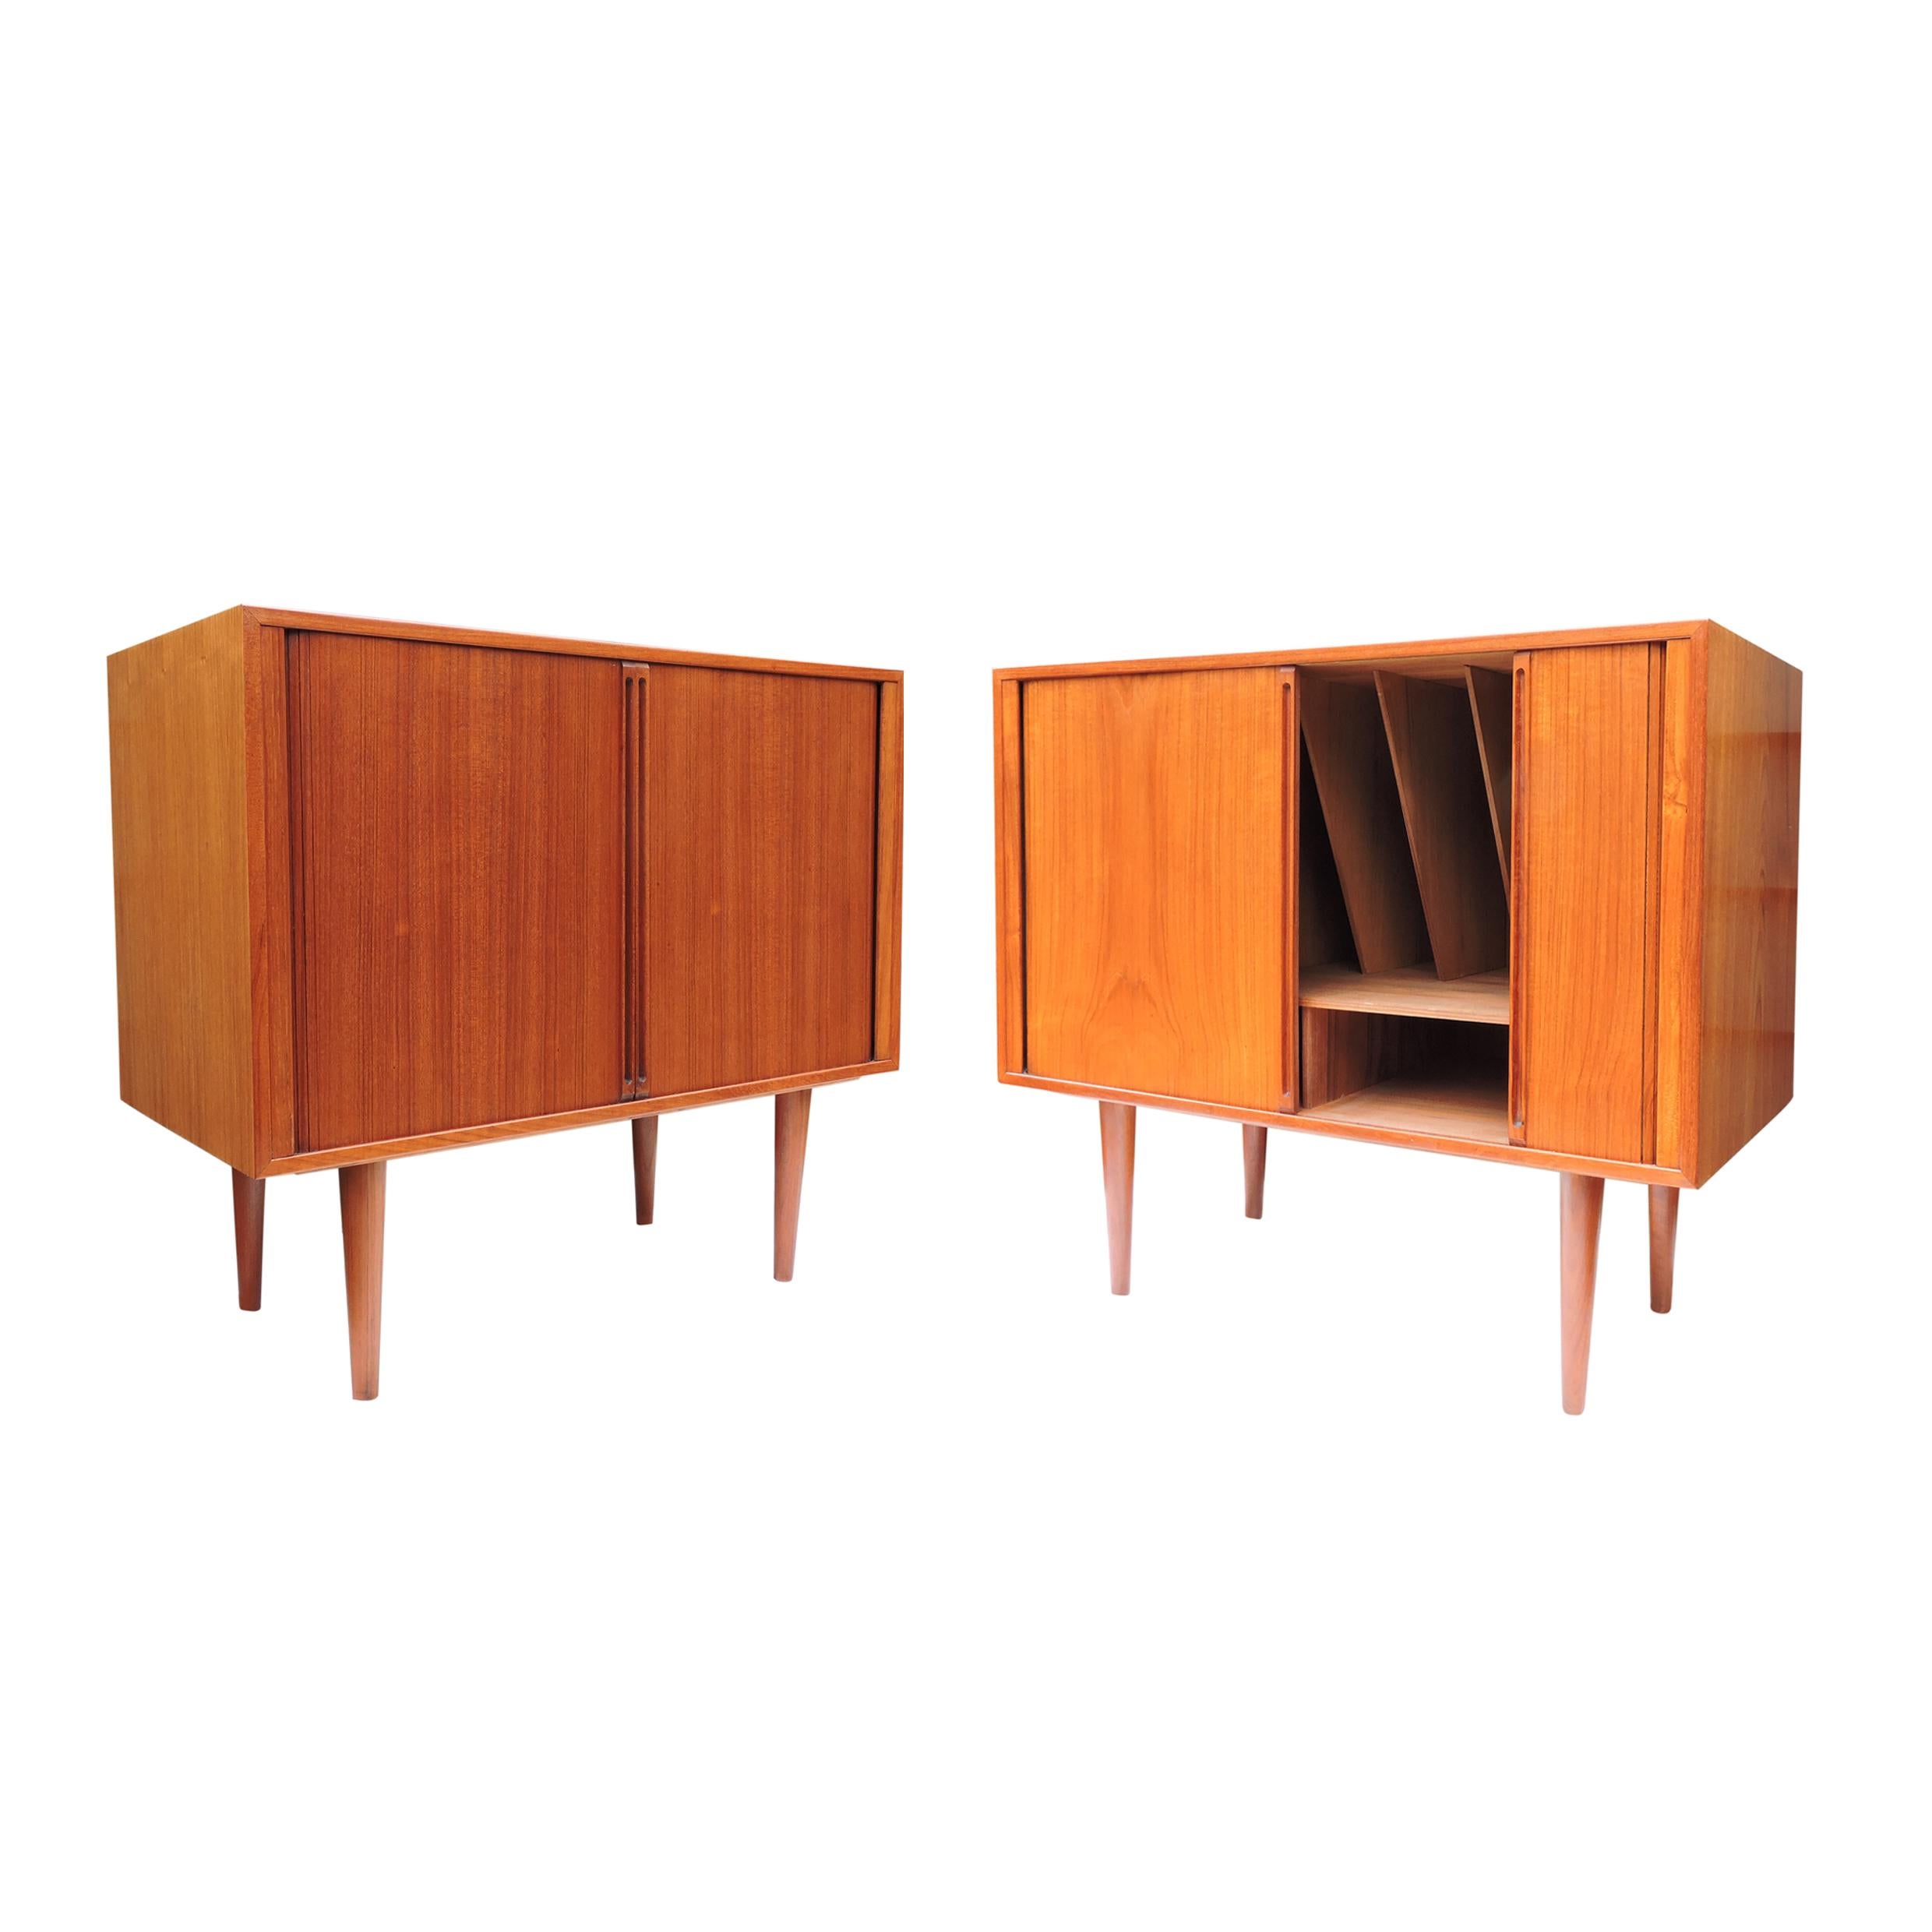 A pair of teak tambour door record cabinets by Kai Kristiansen for Feldballes Mobelfabrik, Denmark, 1960s. There is divided space within, for records or books with two lower shelves.
 